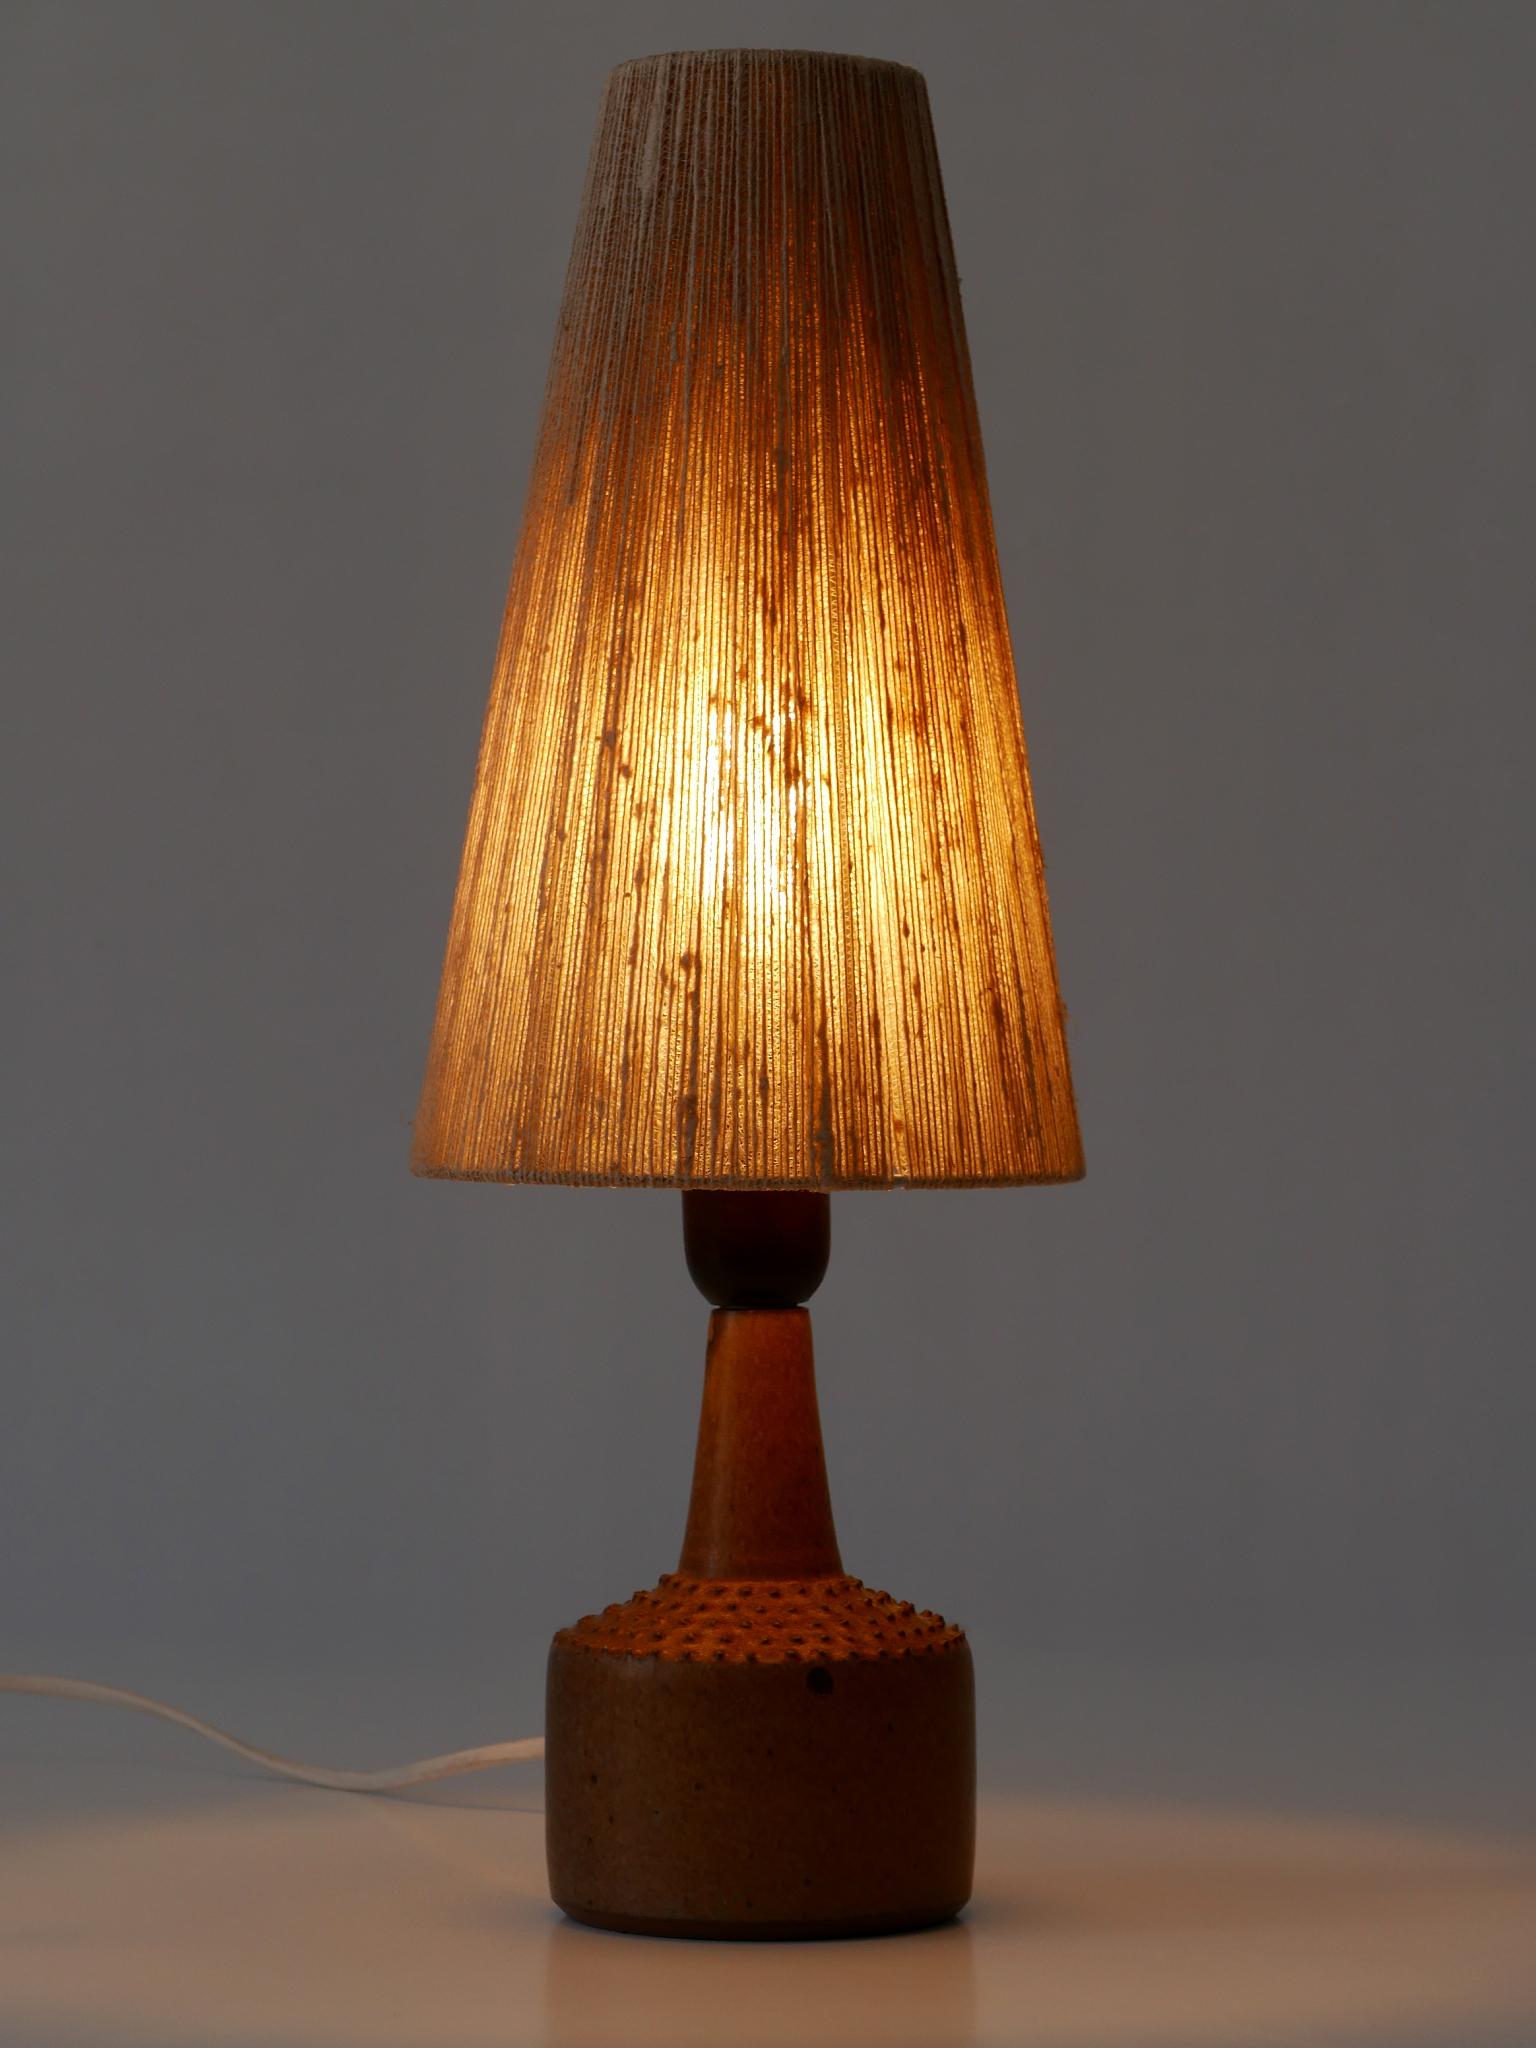 Italian Rare Mid-Century Glazed Stoneware Table Lamp by Rolf Palm for Mölle Sweden 1962